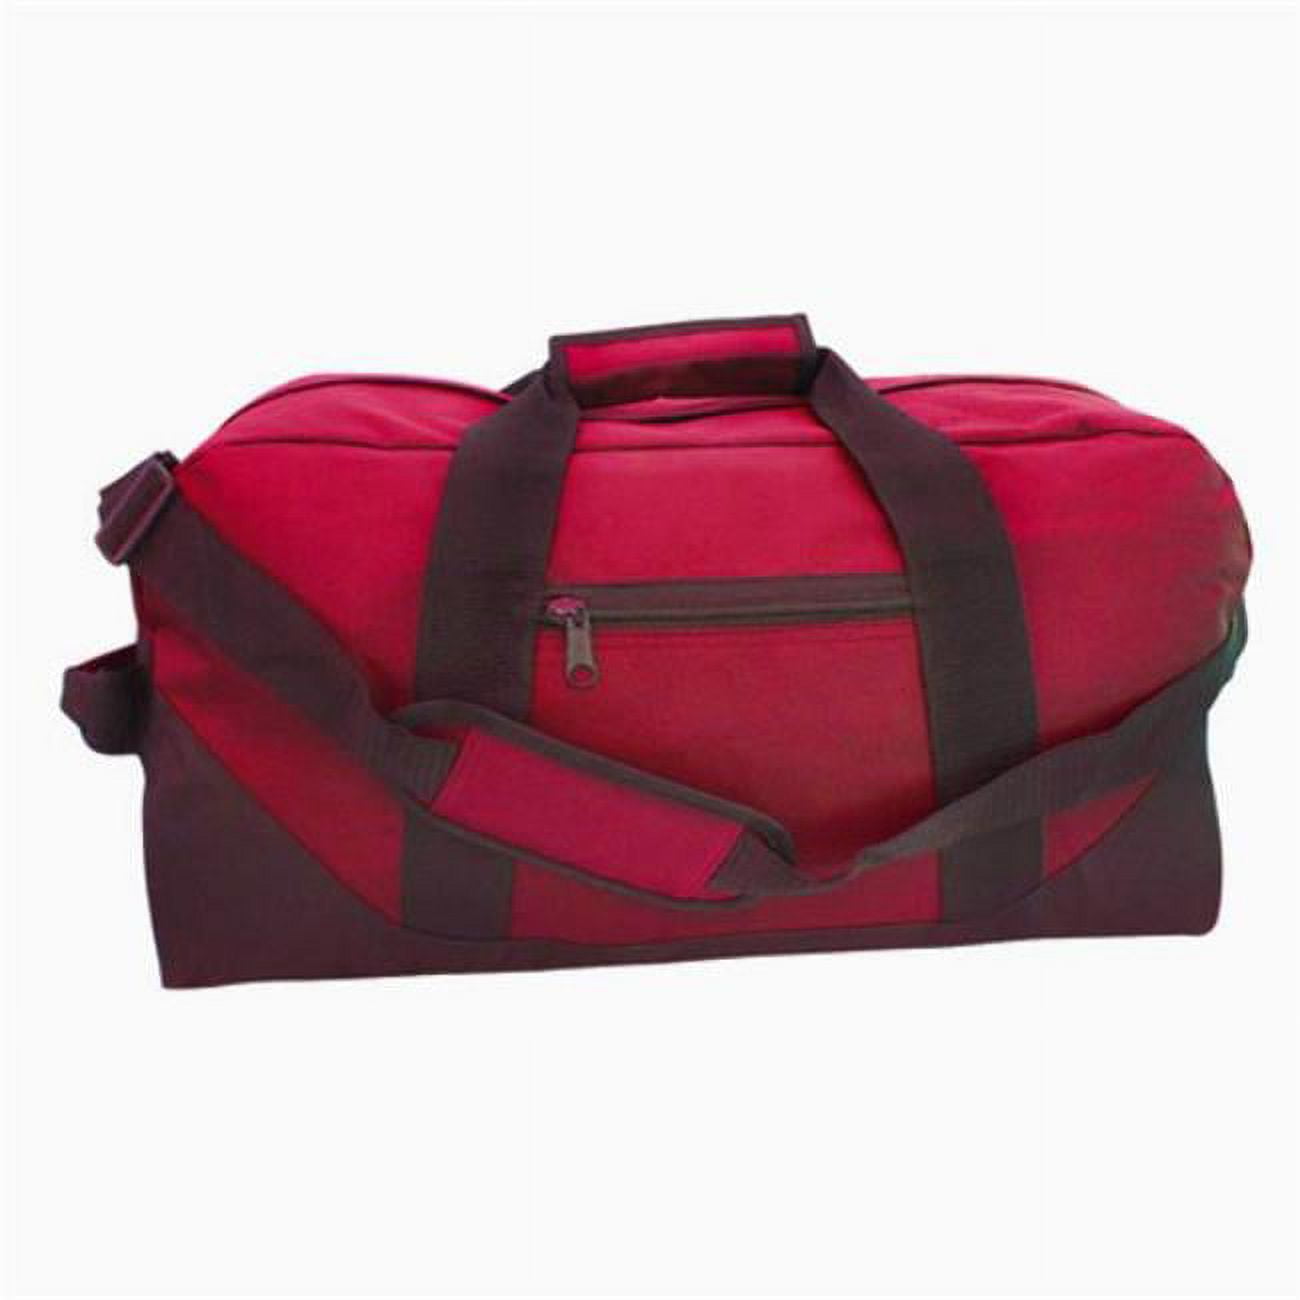 Two-tone Duffel Bag - Black & Red, Case Of 24